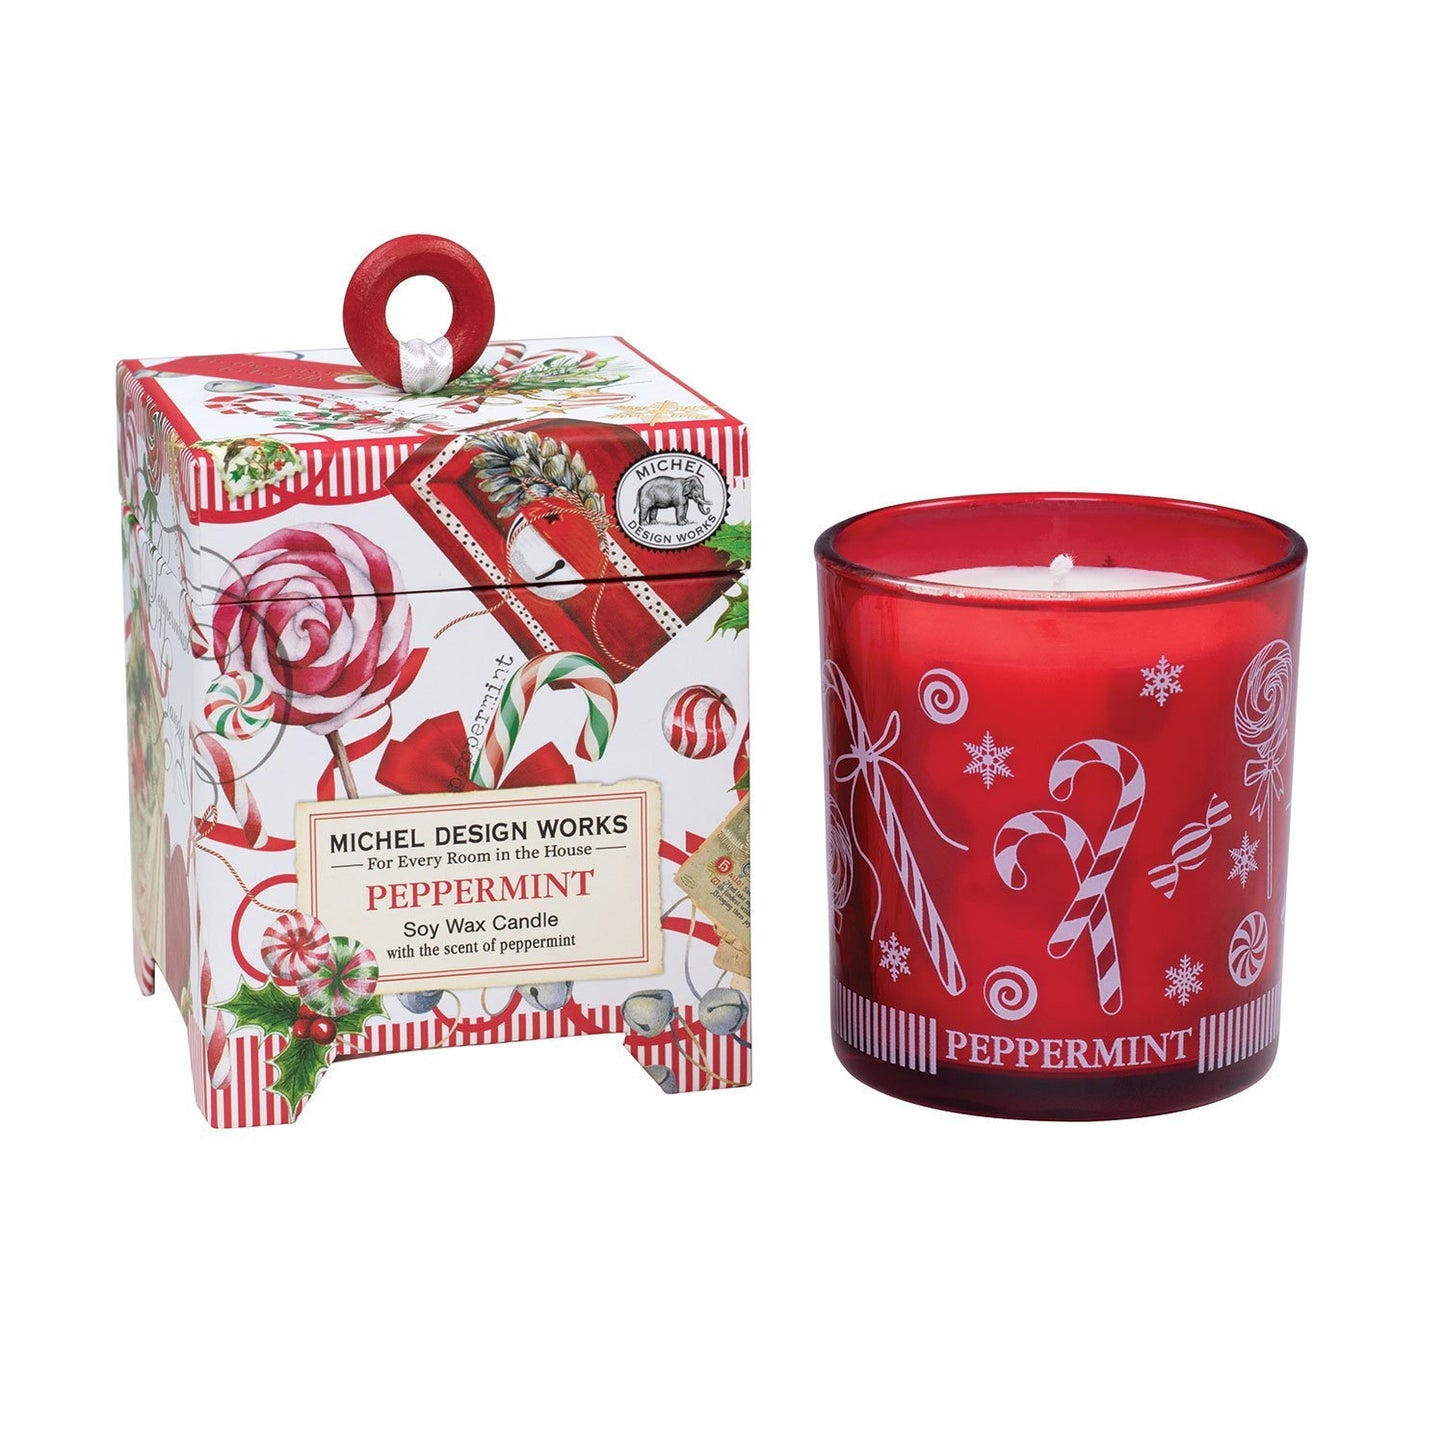 Peppermint 6.5 oz. Soy Wax Candle Classic Holiday Fragrance in Decorative Glass